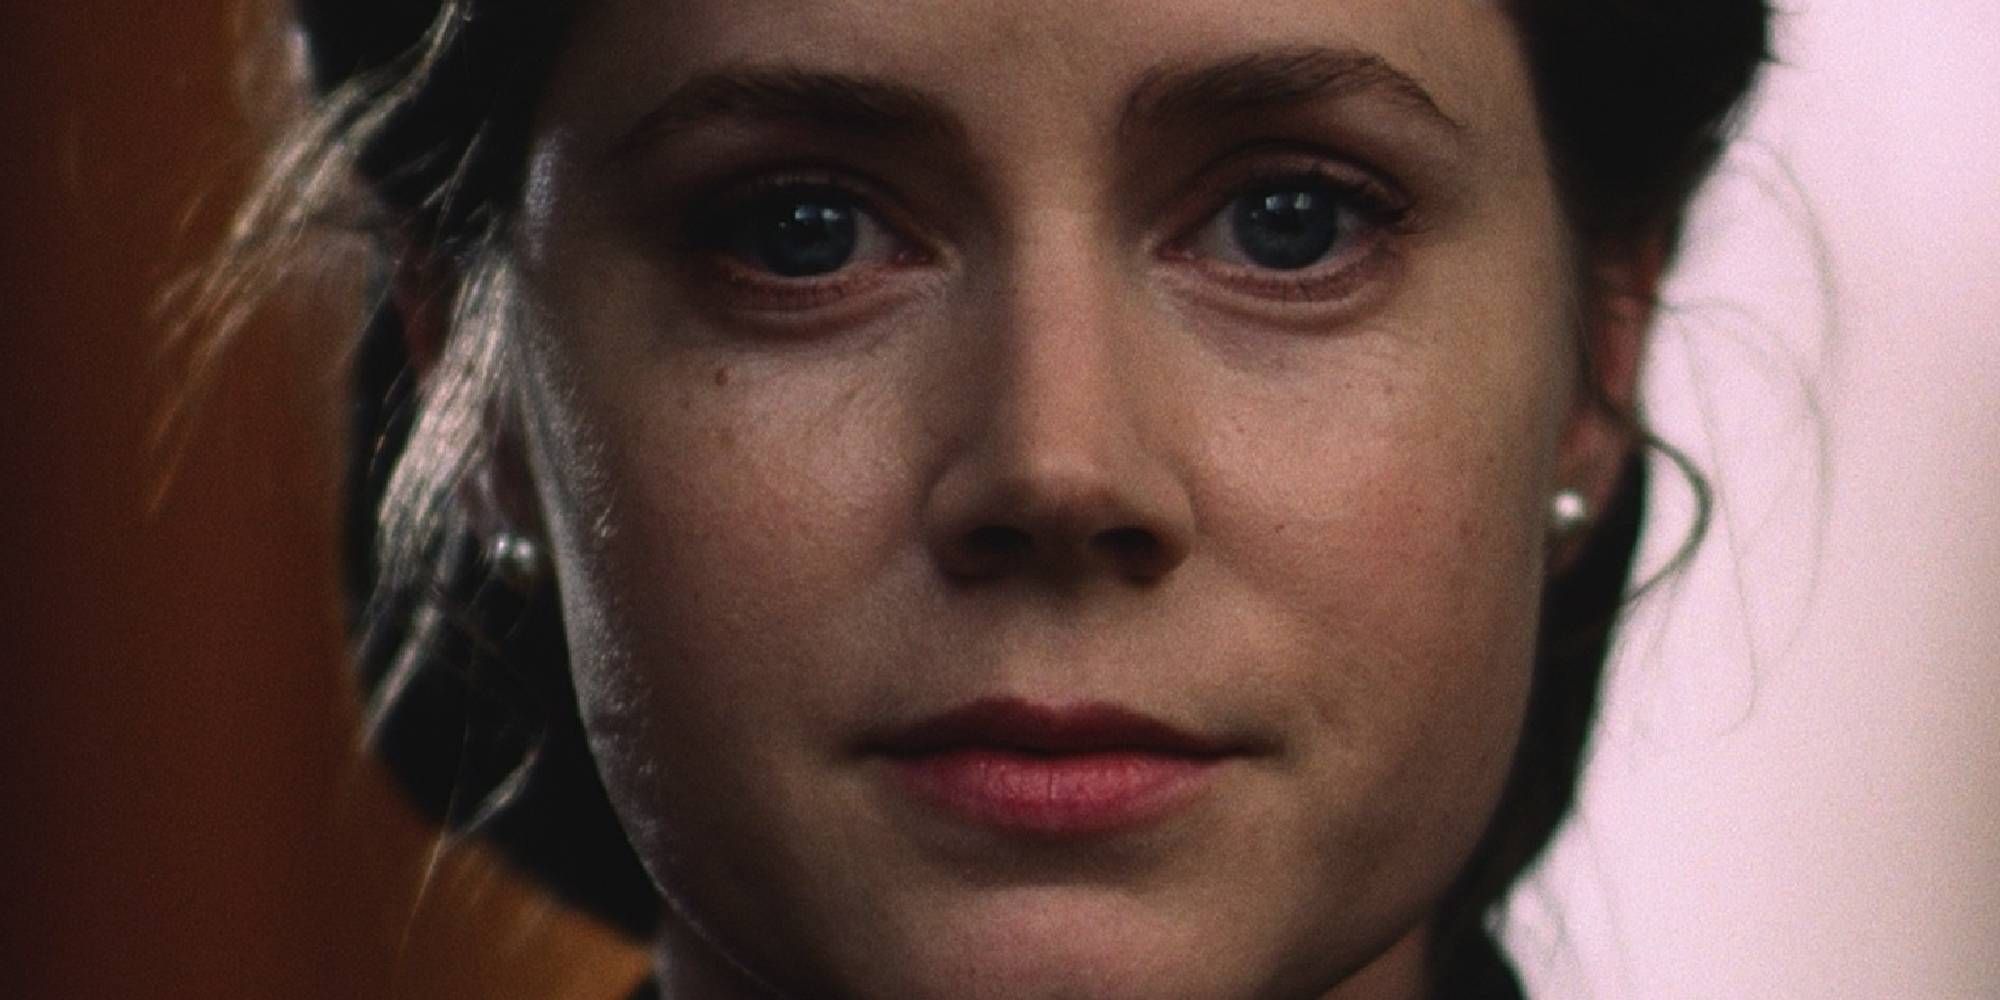 A close-up shot of Amy Adams' face in The Master.